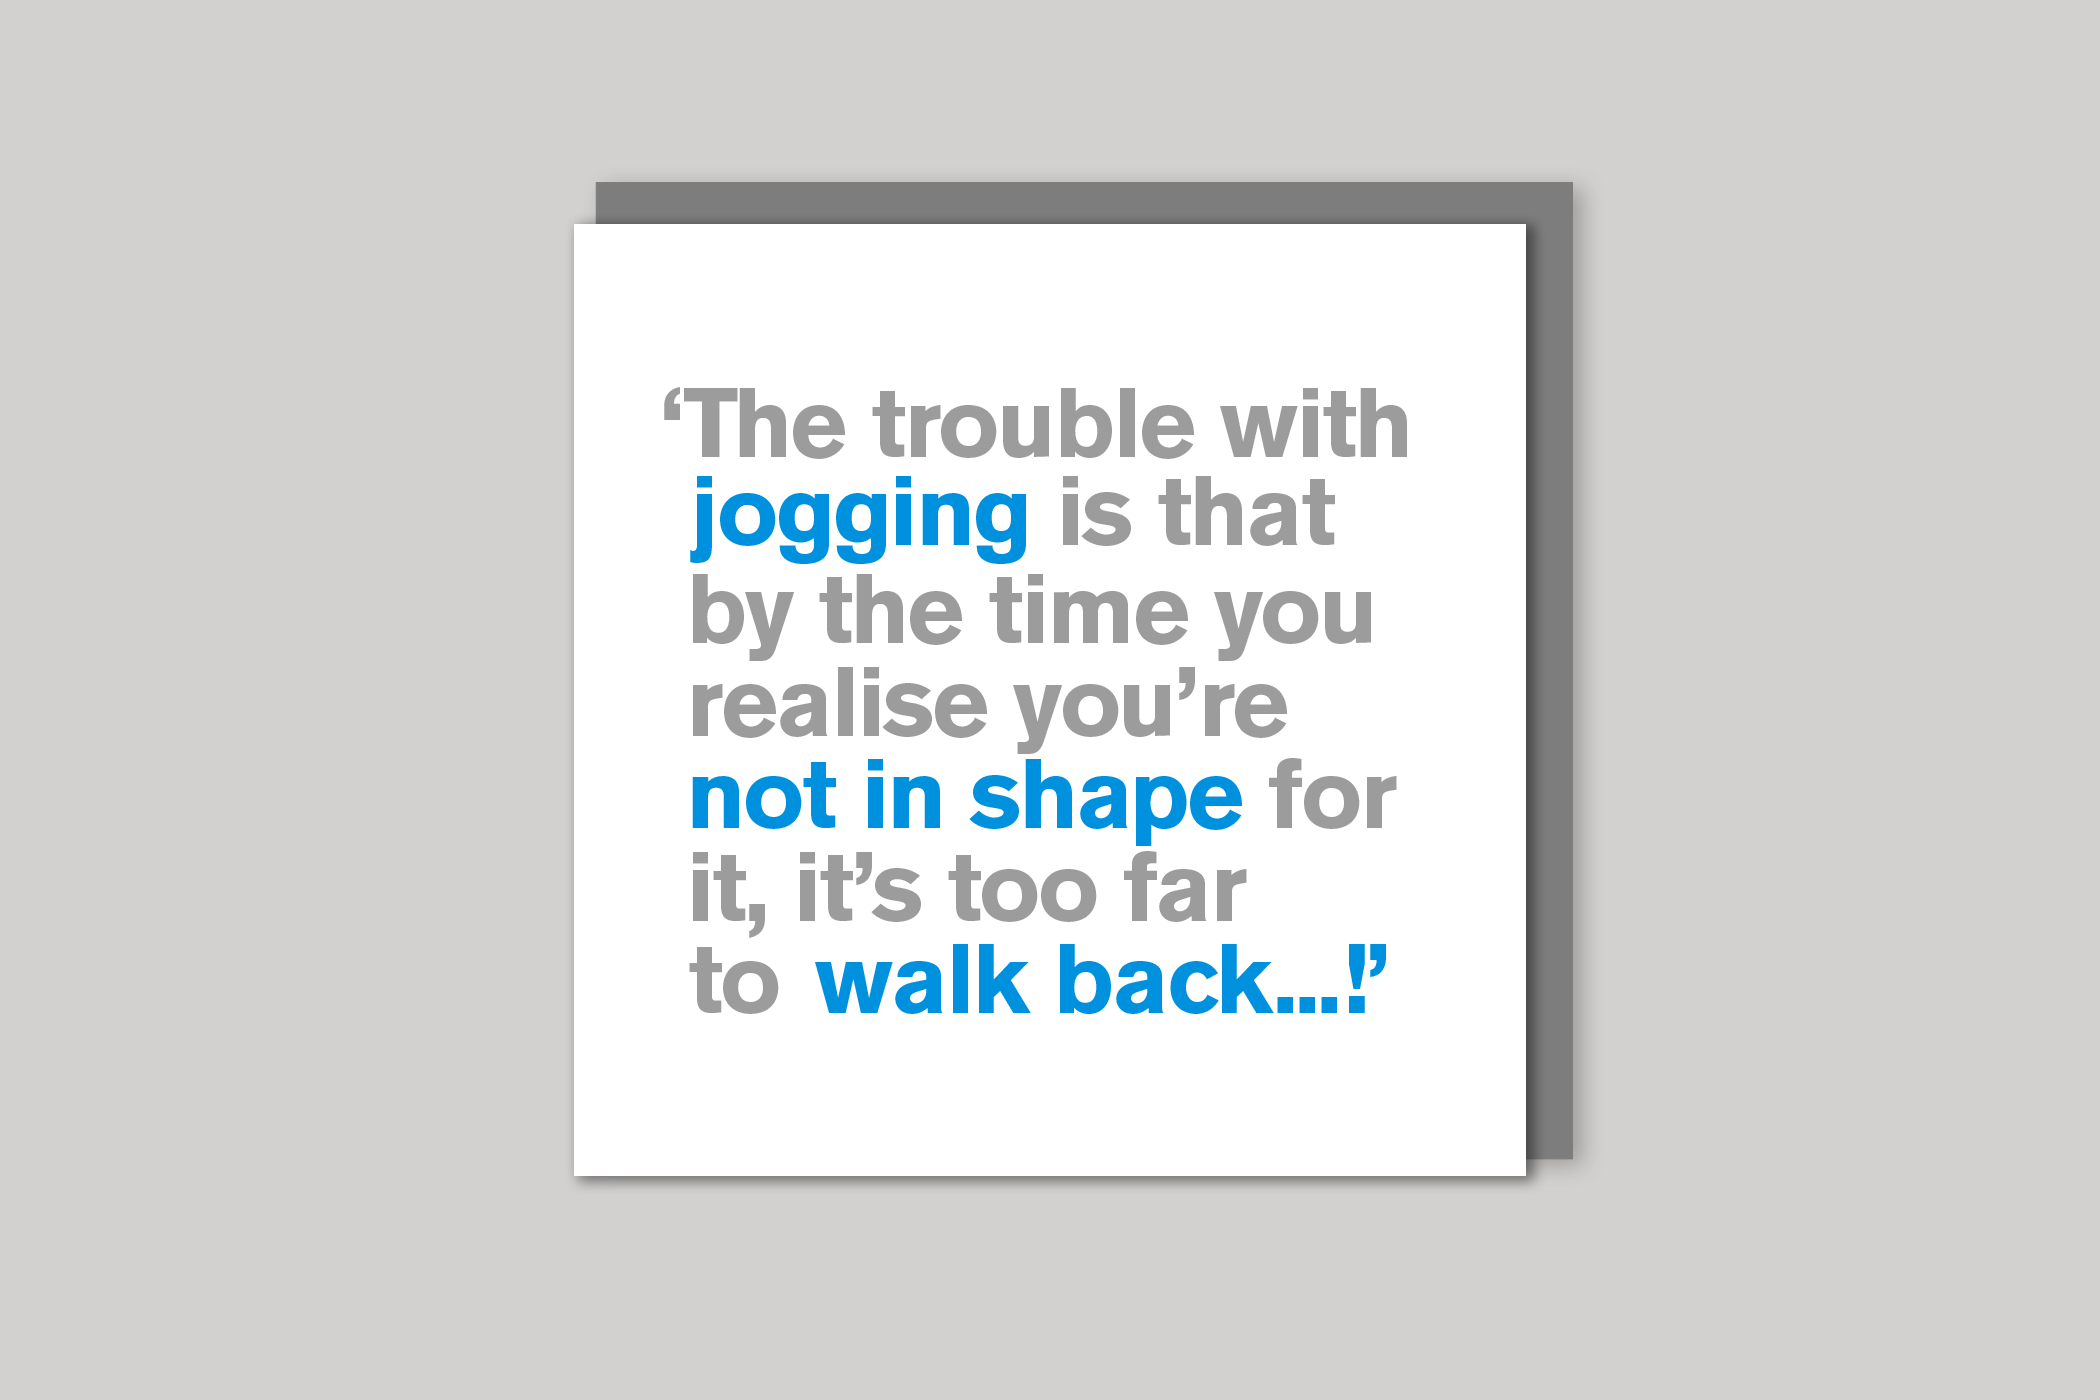 The Trouble with Jogging from Lyric range of quotation cards by Icon, back page.